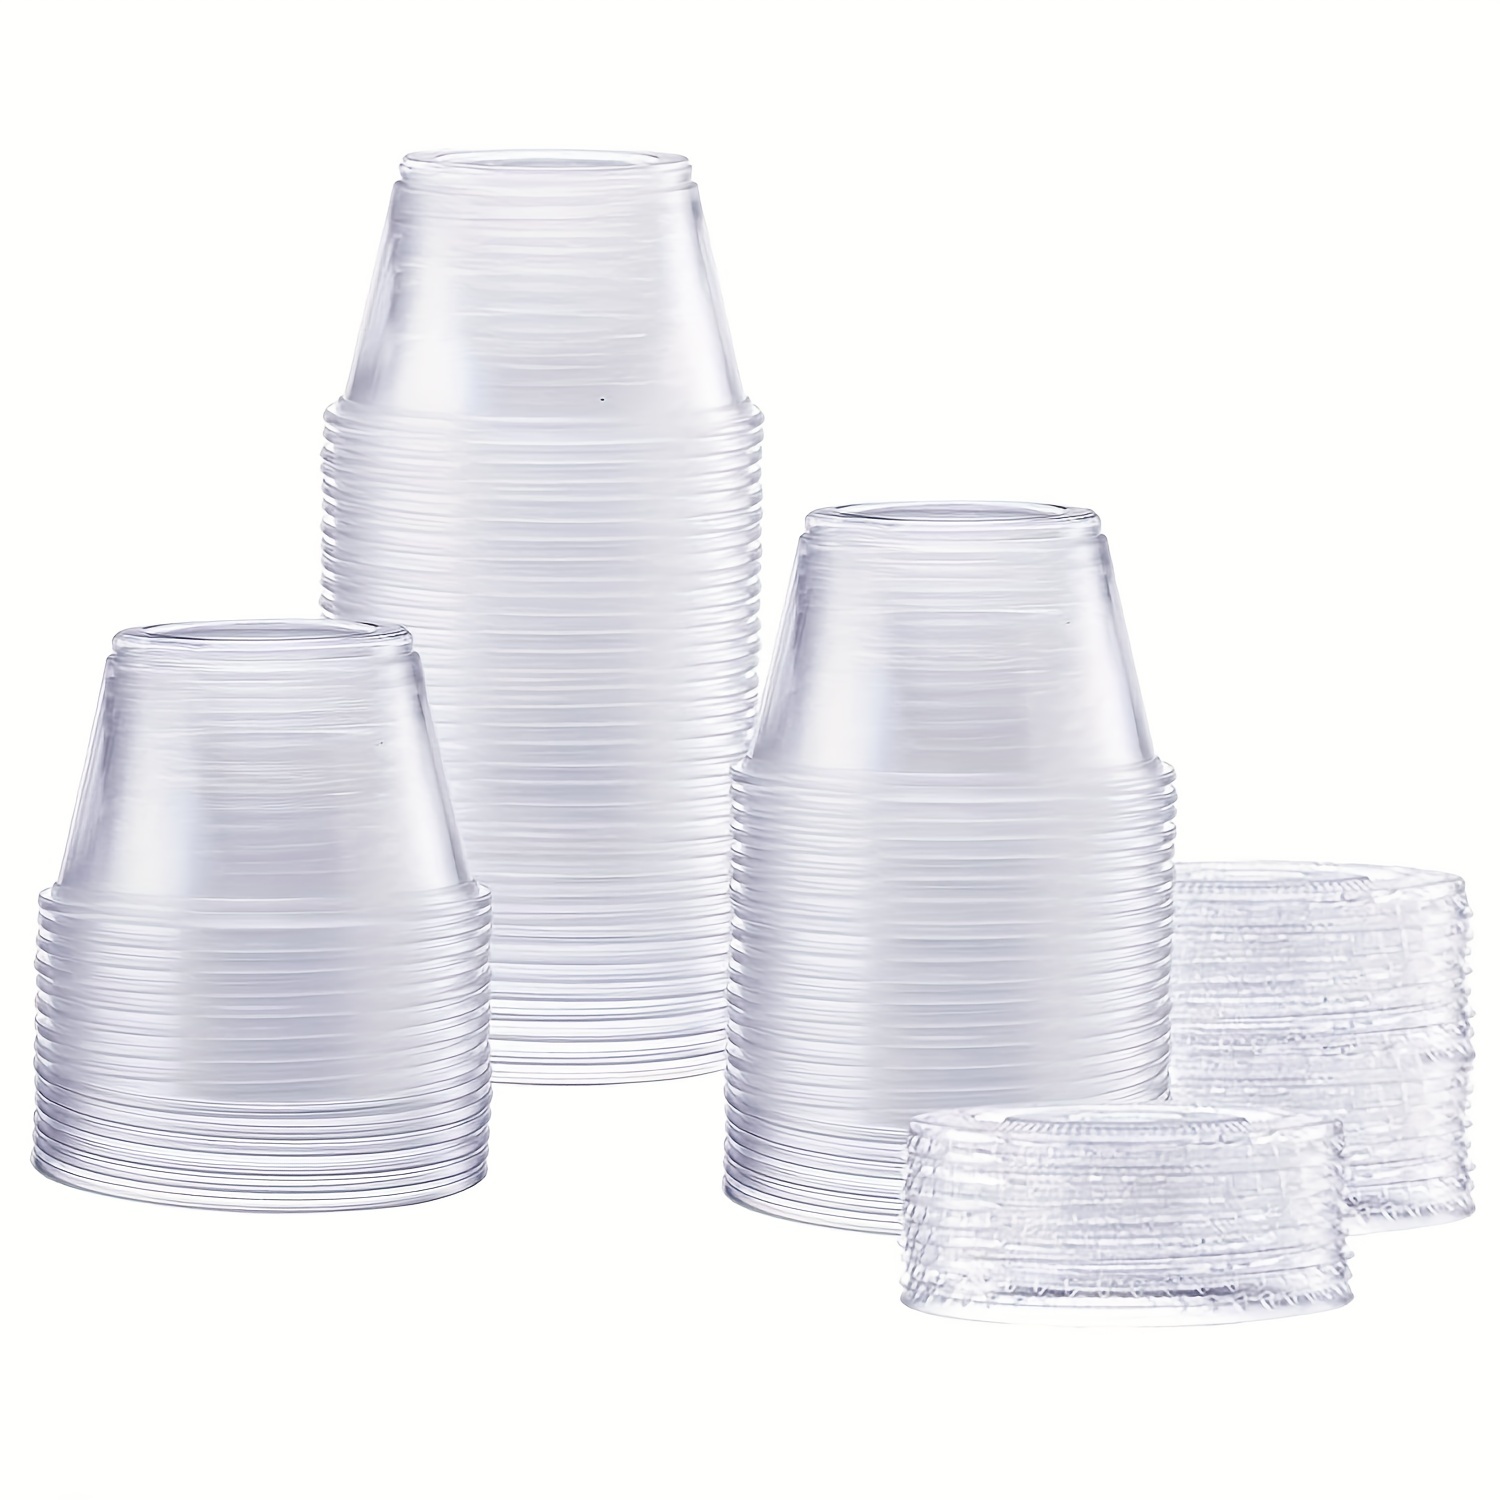 Disposable Plastic Portion Cups With Lids,clear Portion Container